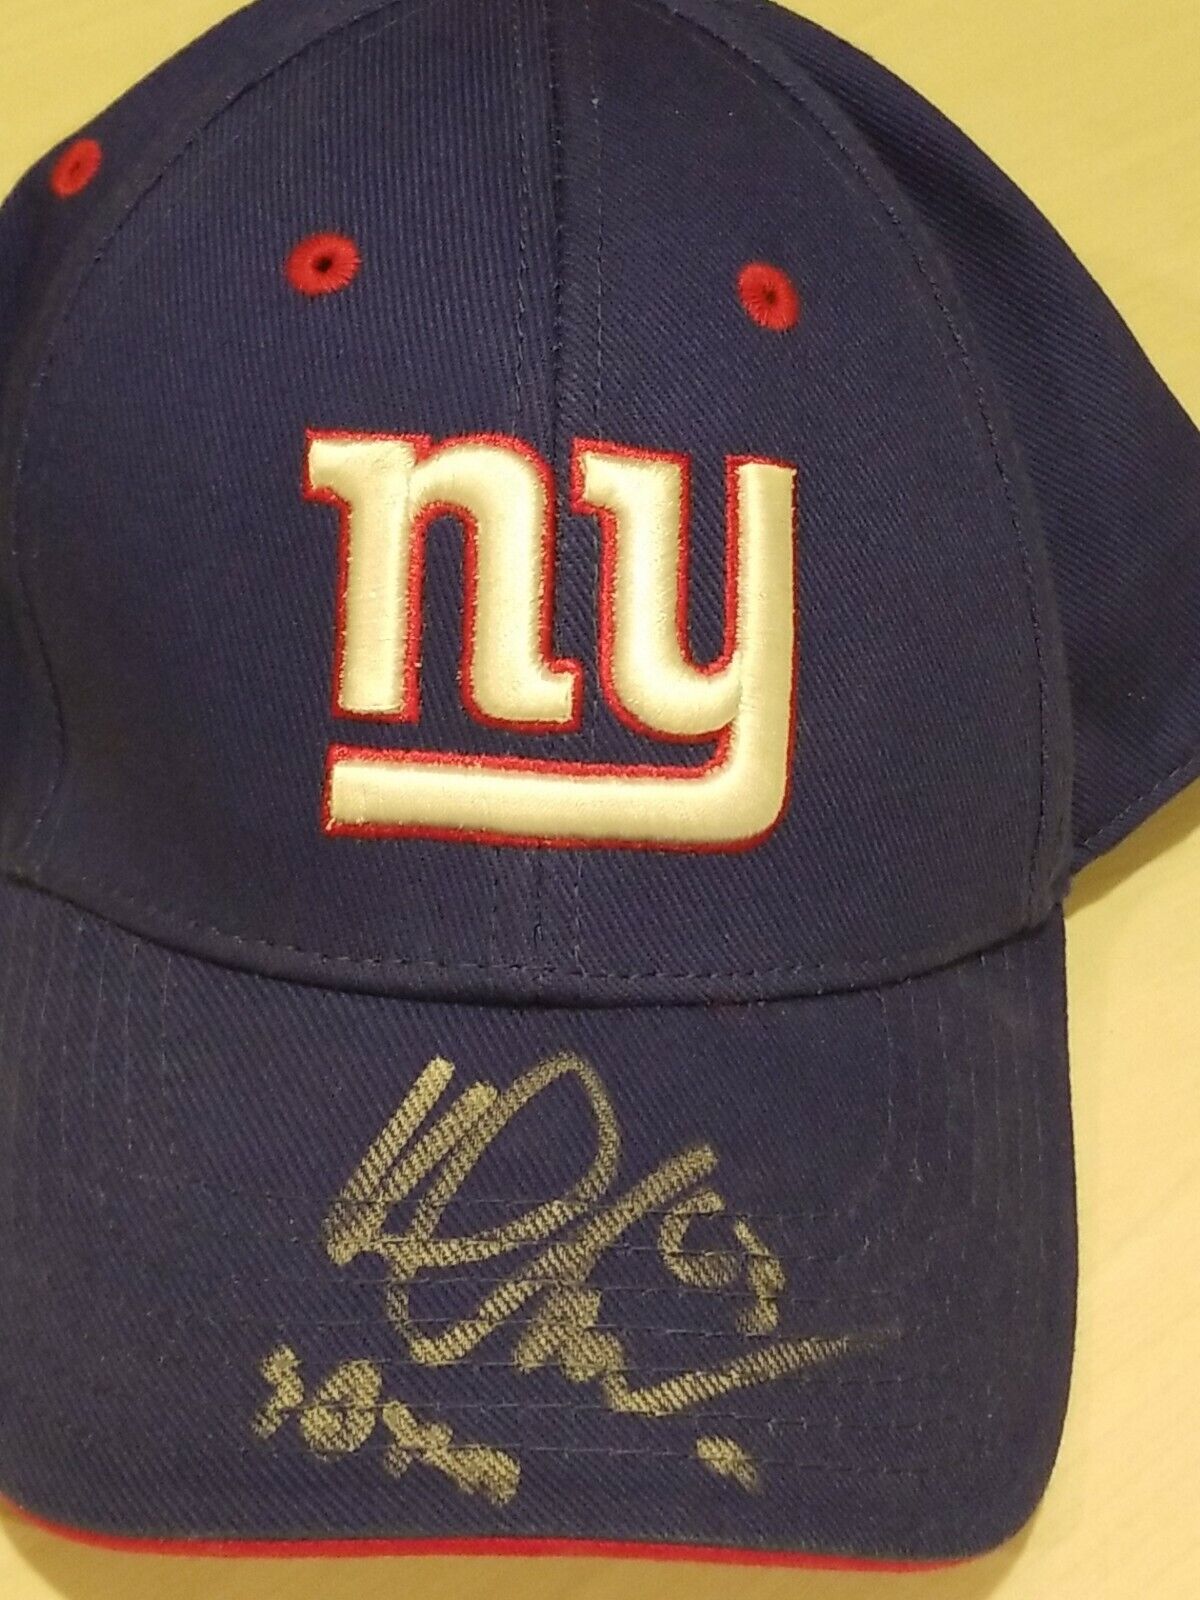 karl nelson signed giants hat autographed cap new york ny gmen real authentic